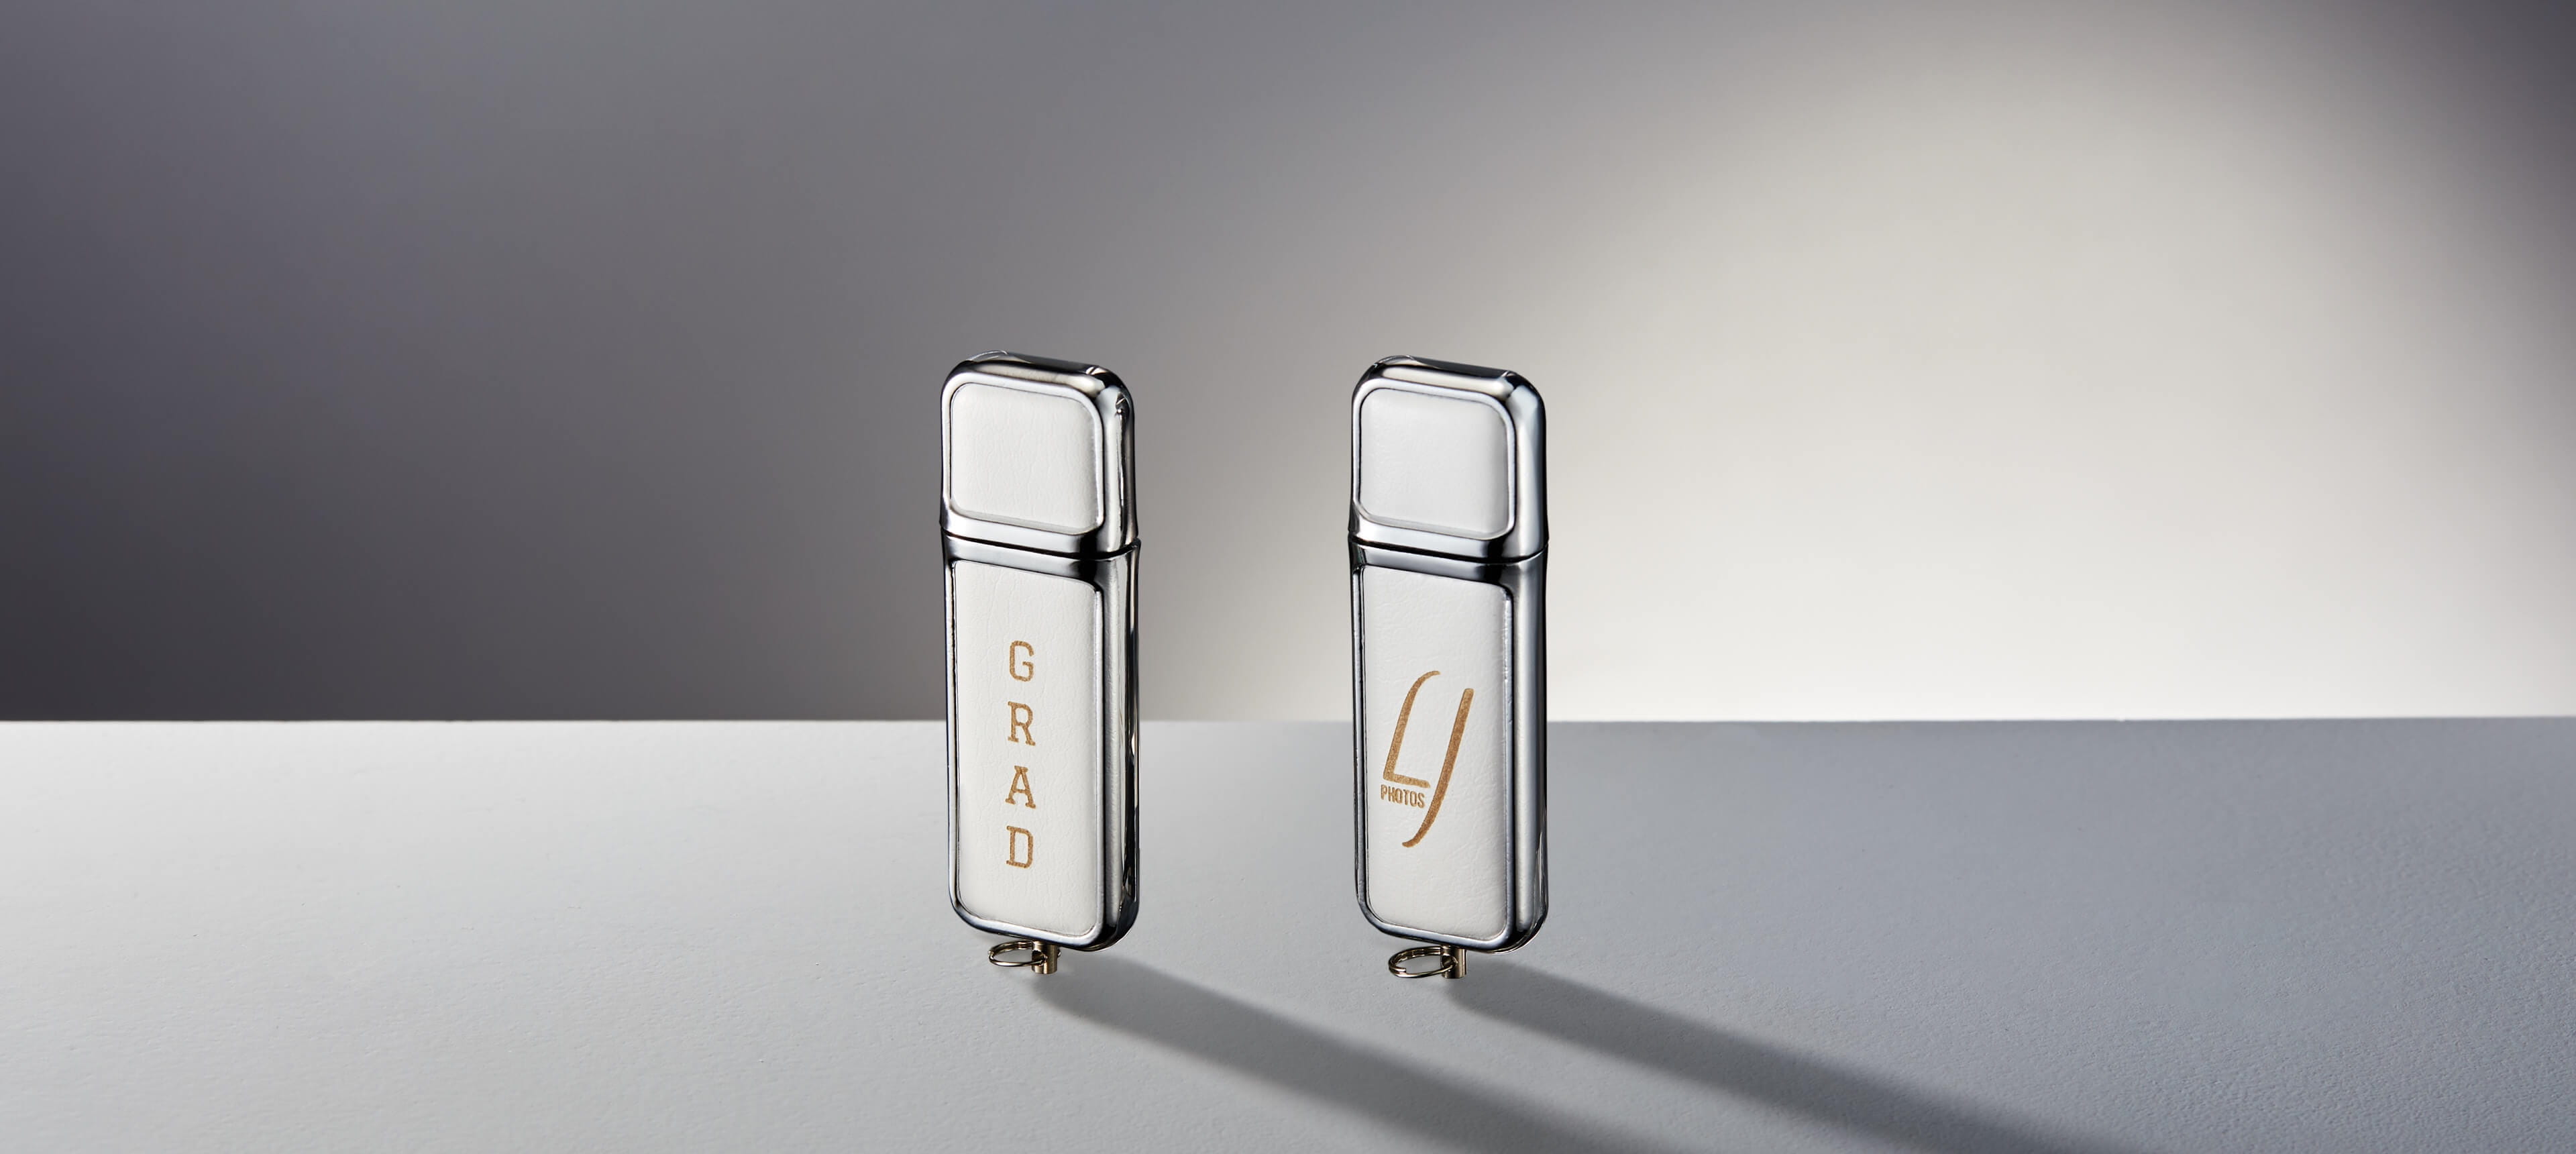 two custom usb drives in white leatherette with engraving